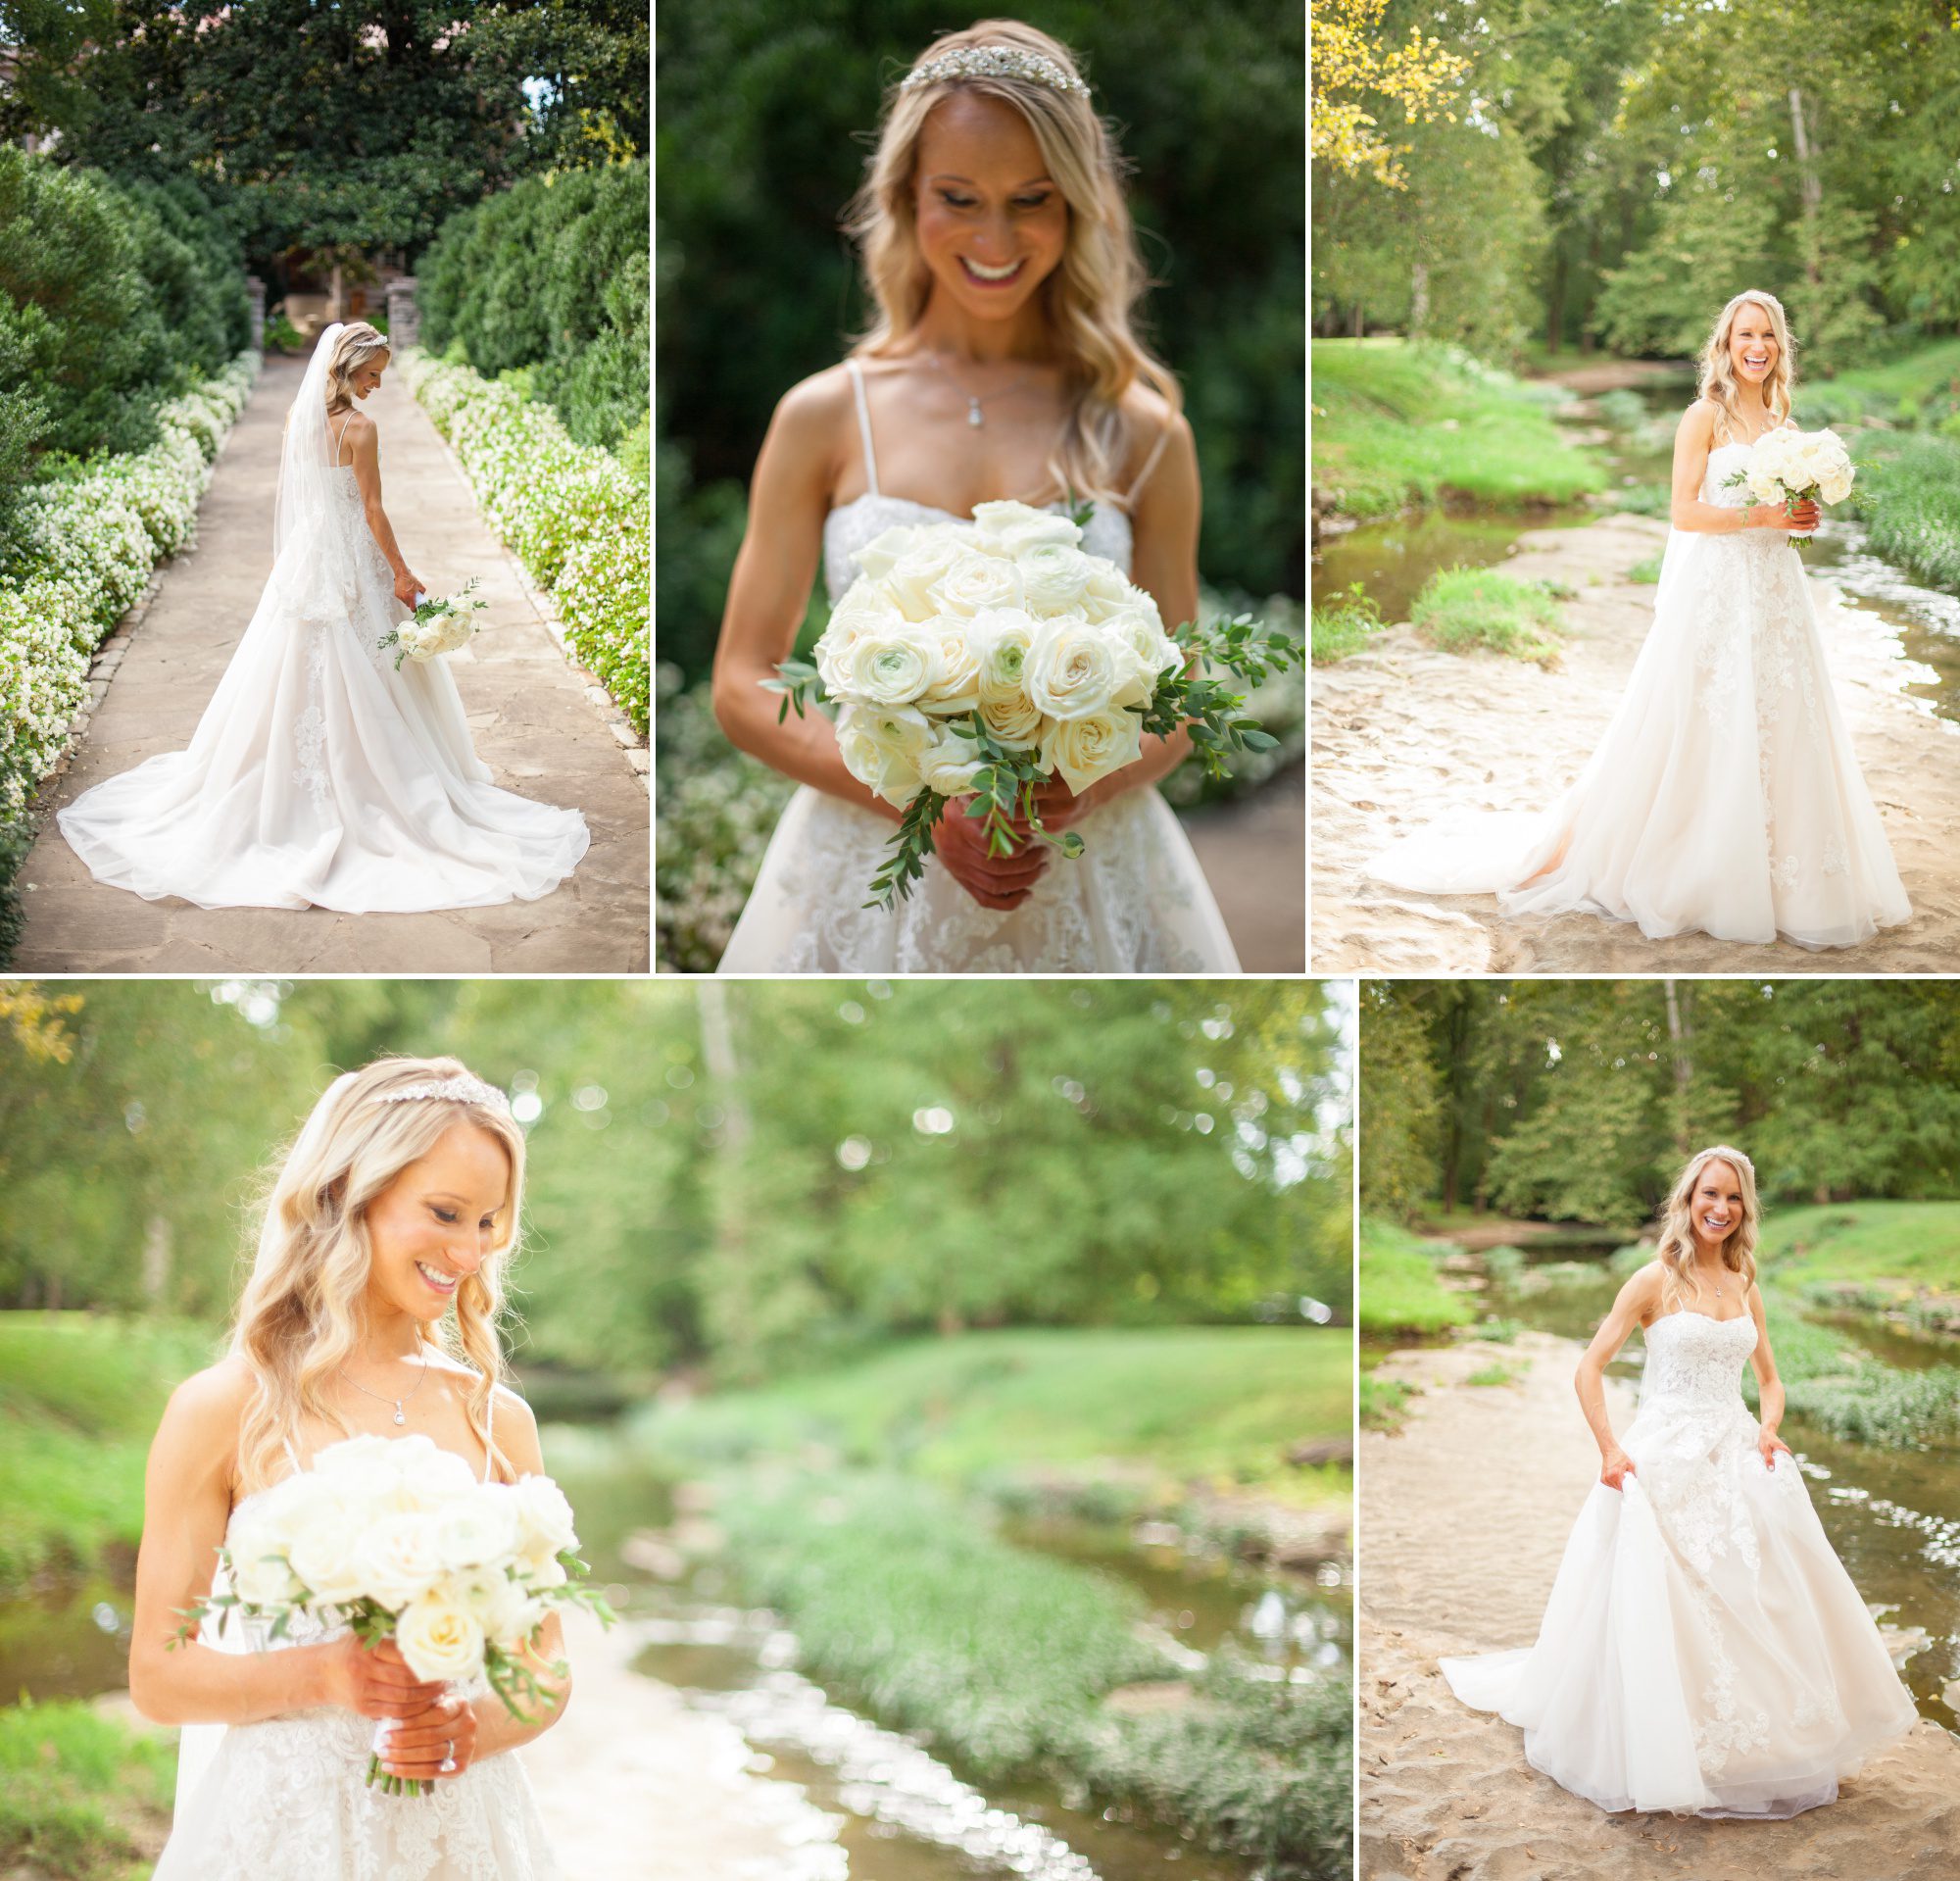 Bridal portrait down in the creek bed and garden before wedding ceremony and reception at Belle Meade Plantation in Nashville, TN. Photos by Krista Lee Photography 